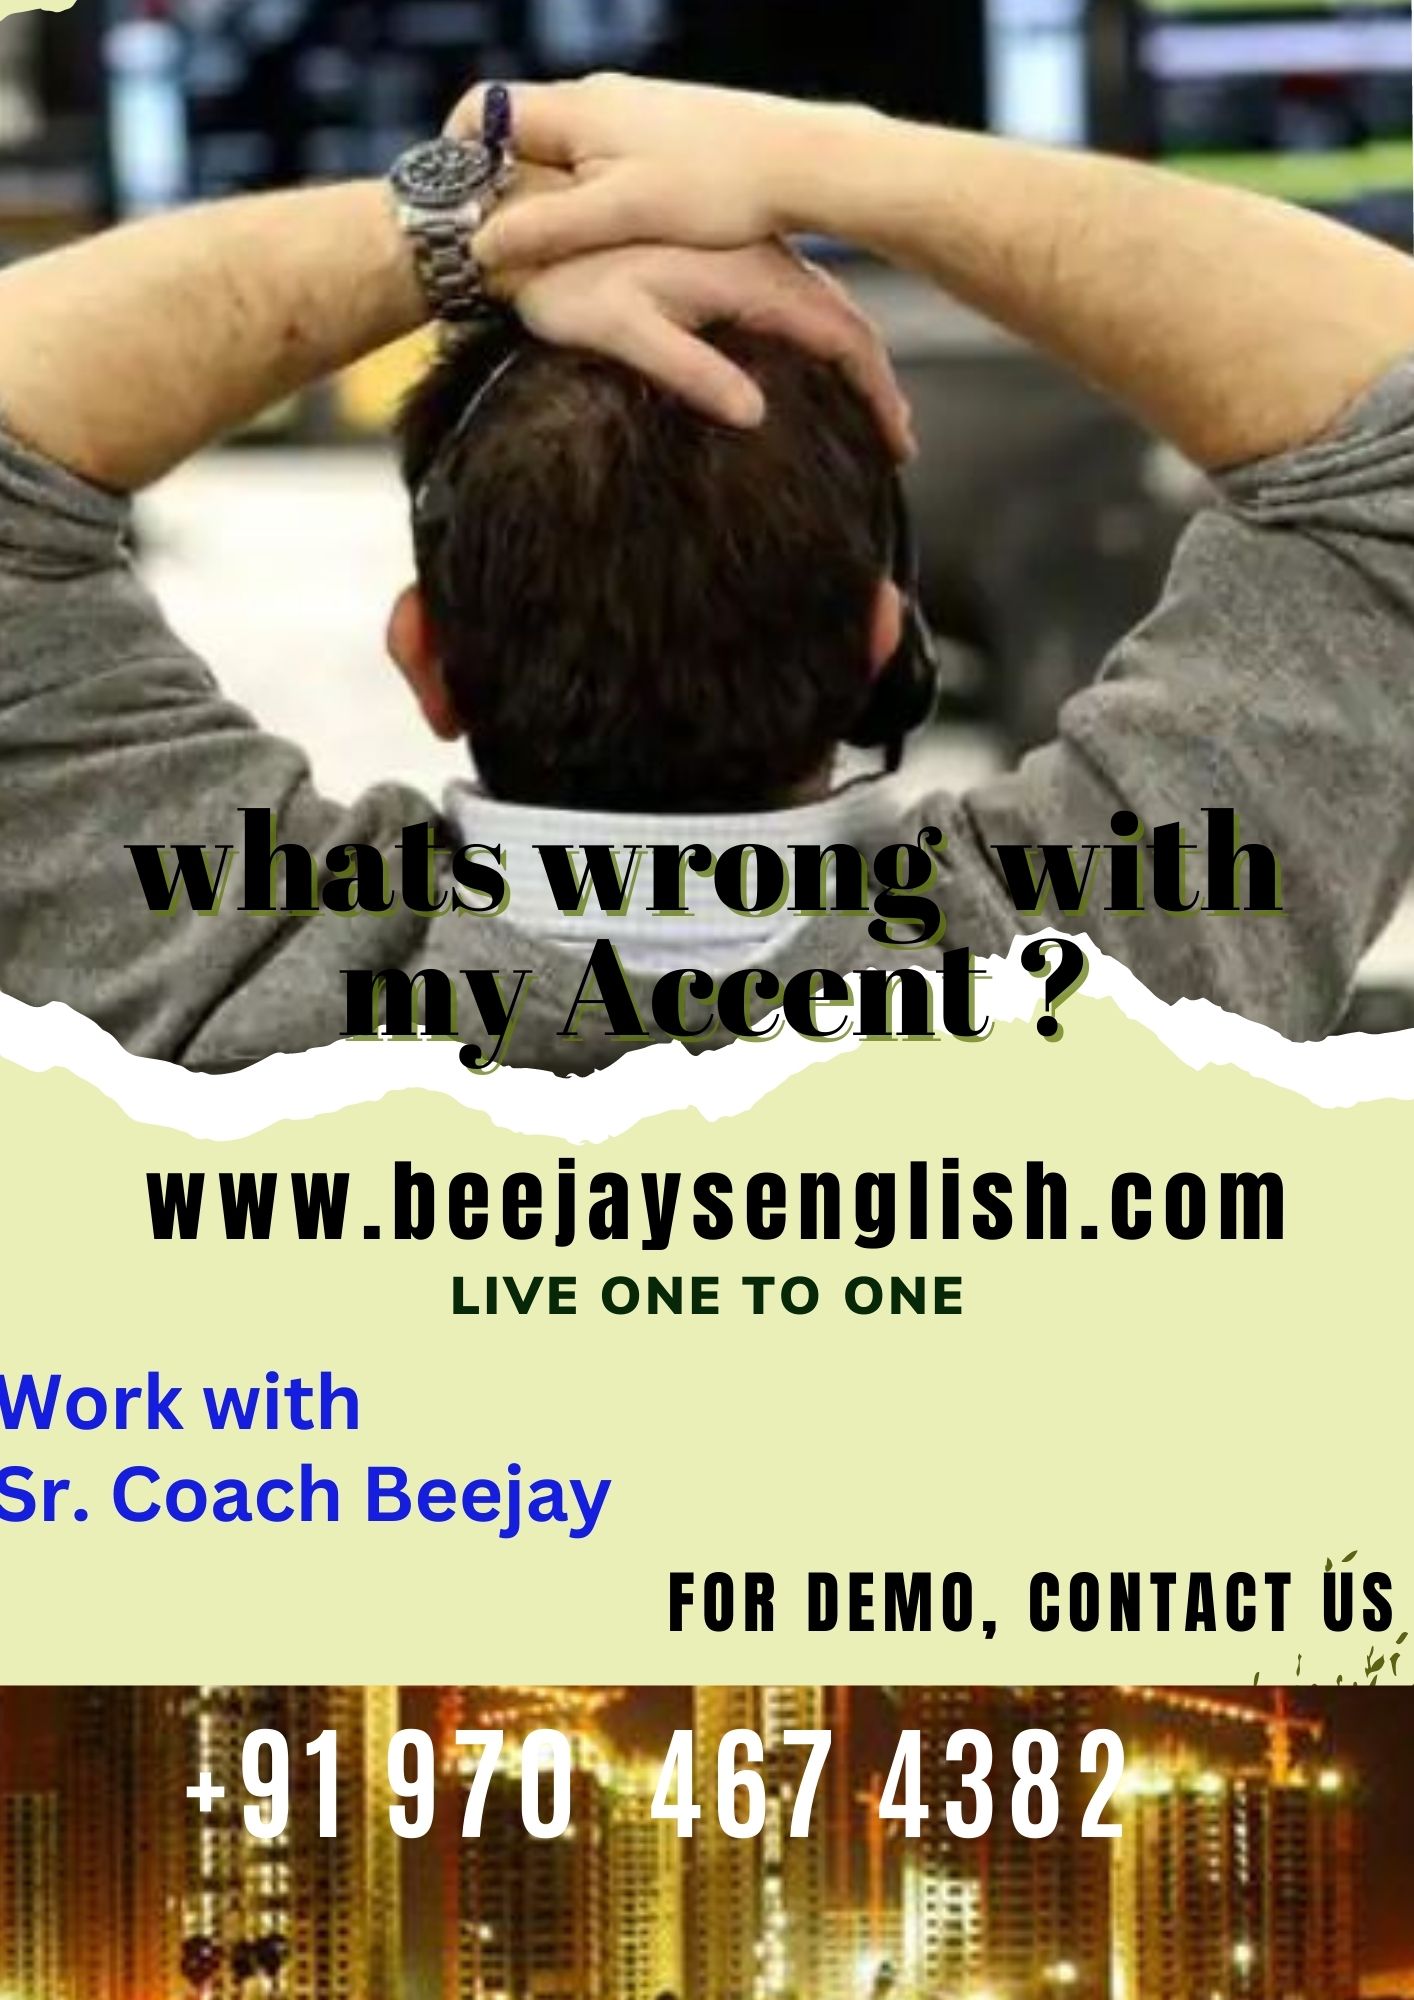 Beejays Online Innovation Campus for Business Owners